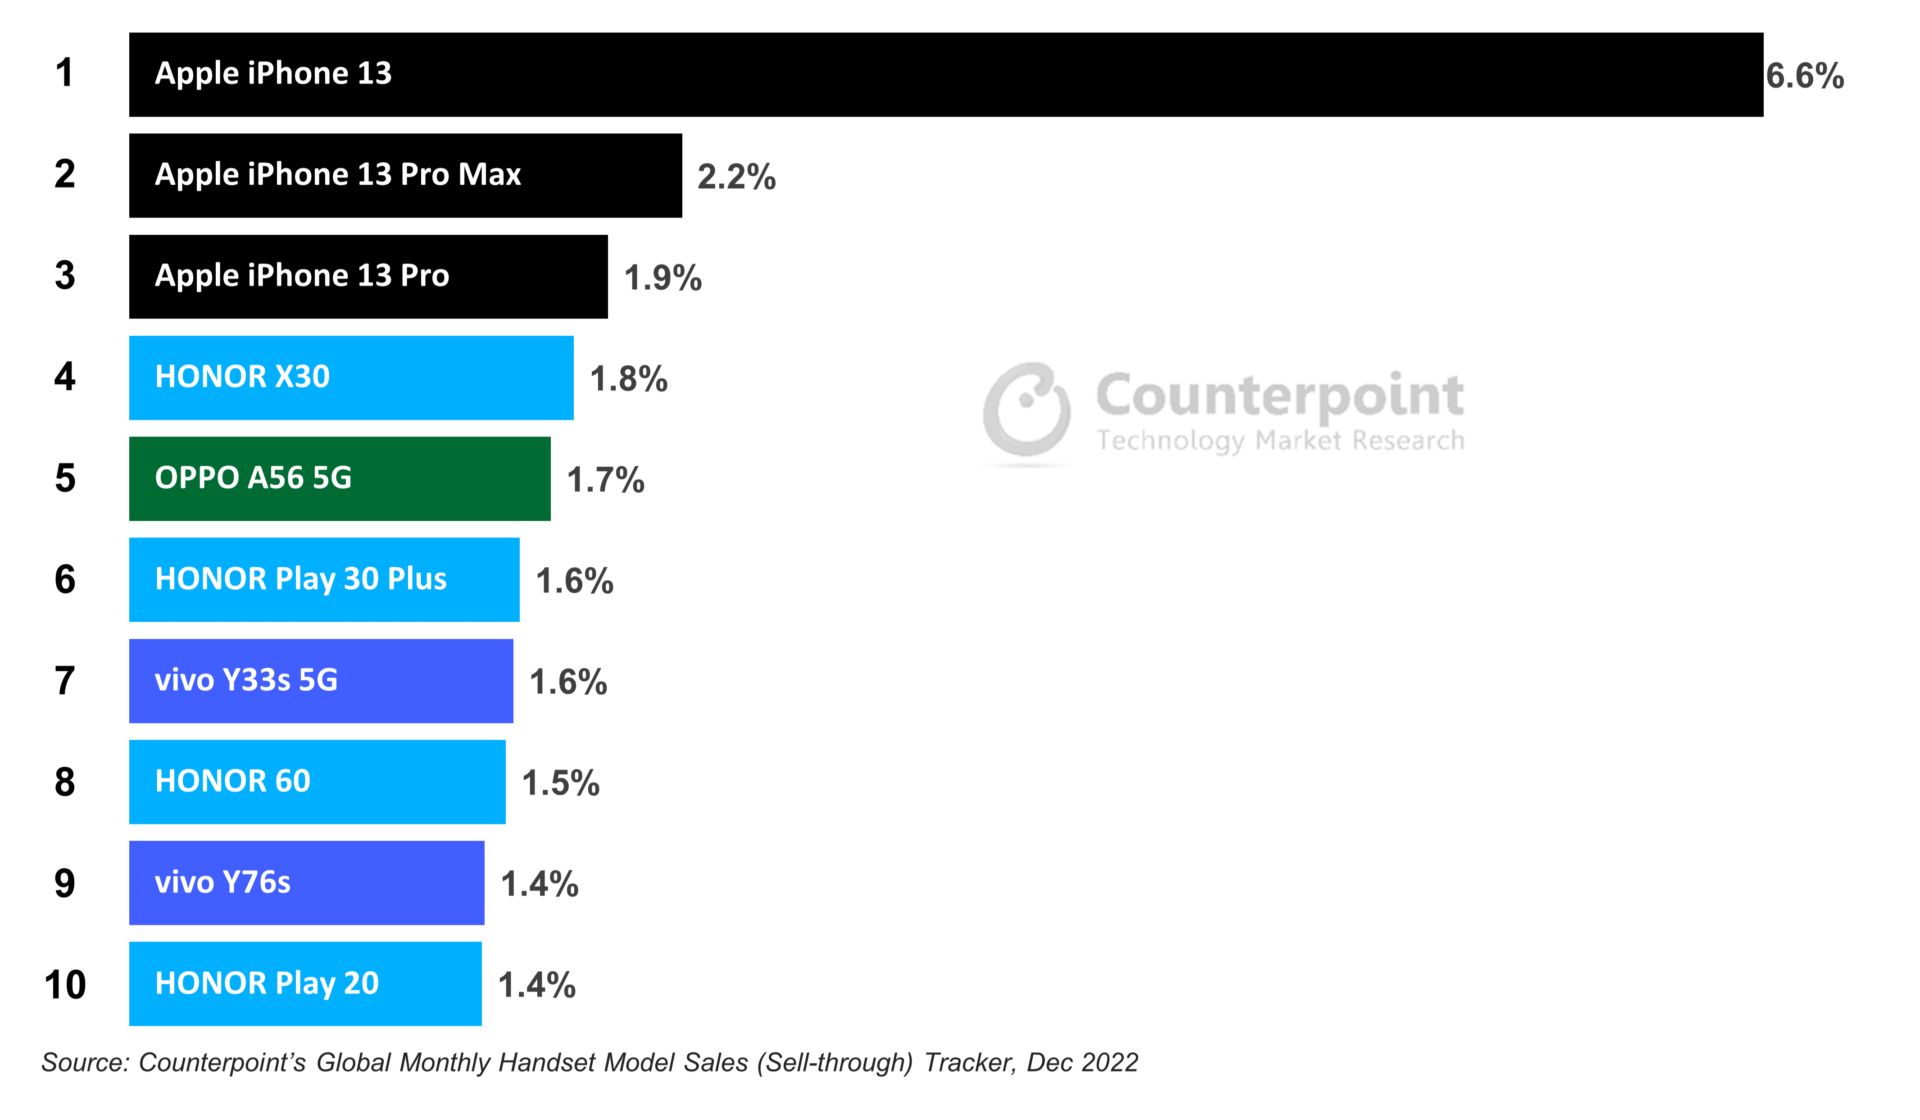 Top 10 Best-selling Smartphone in China (Unit Sales Share) 2022